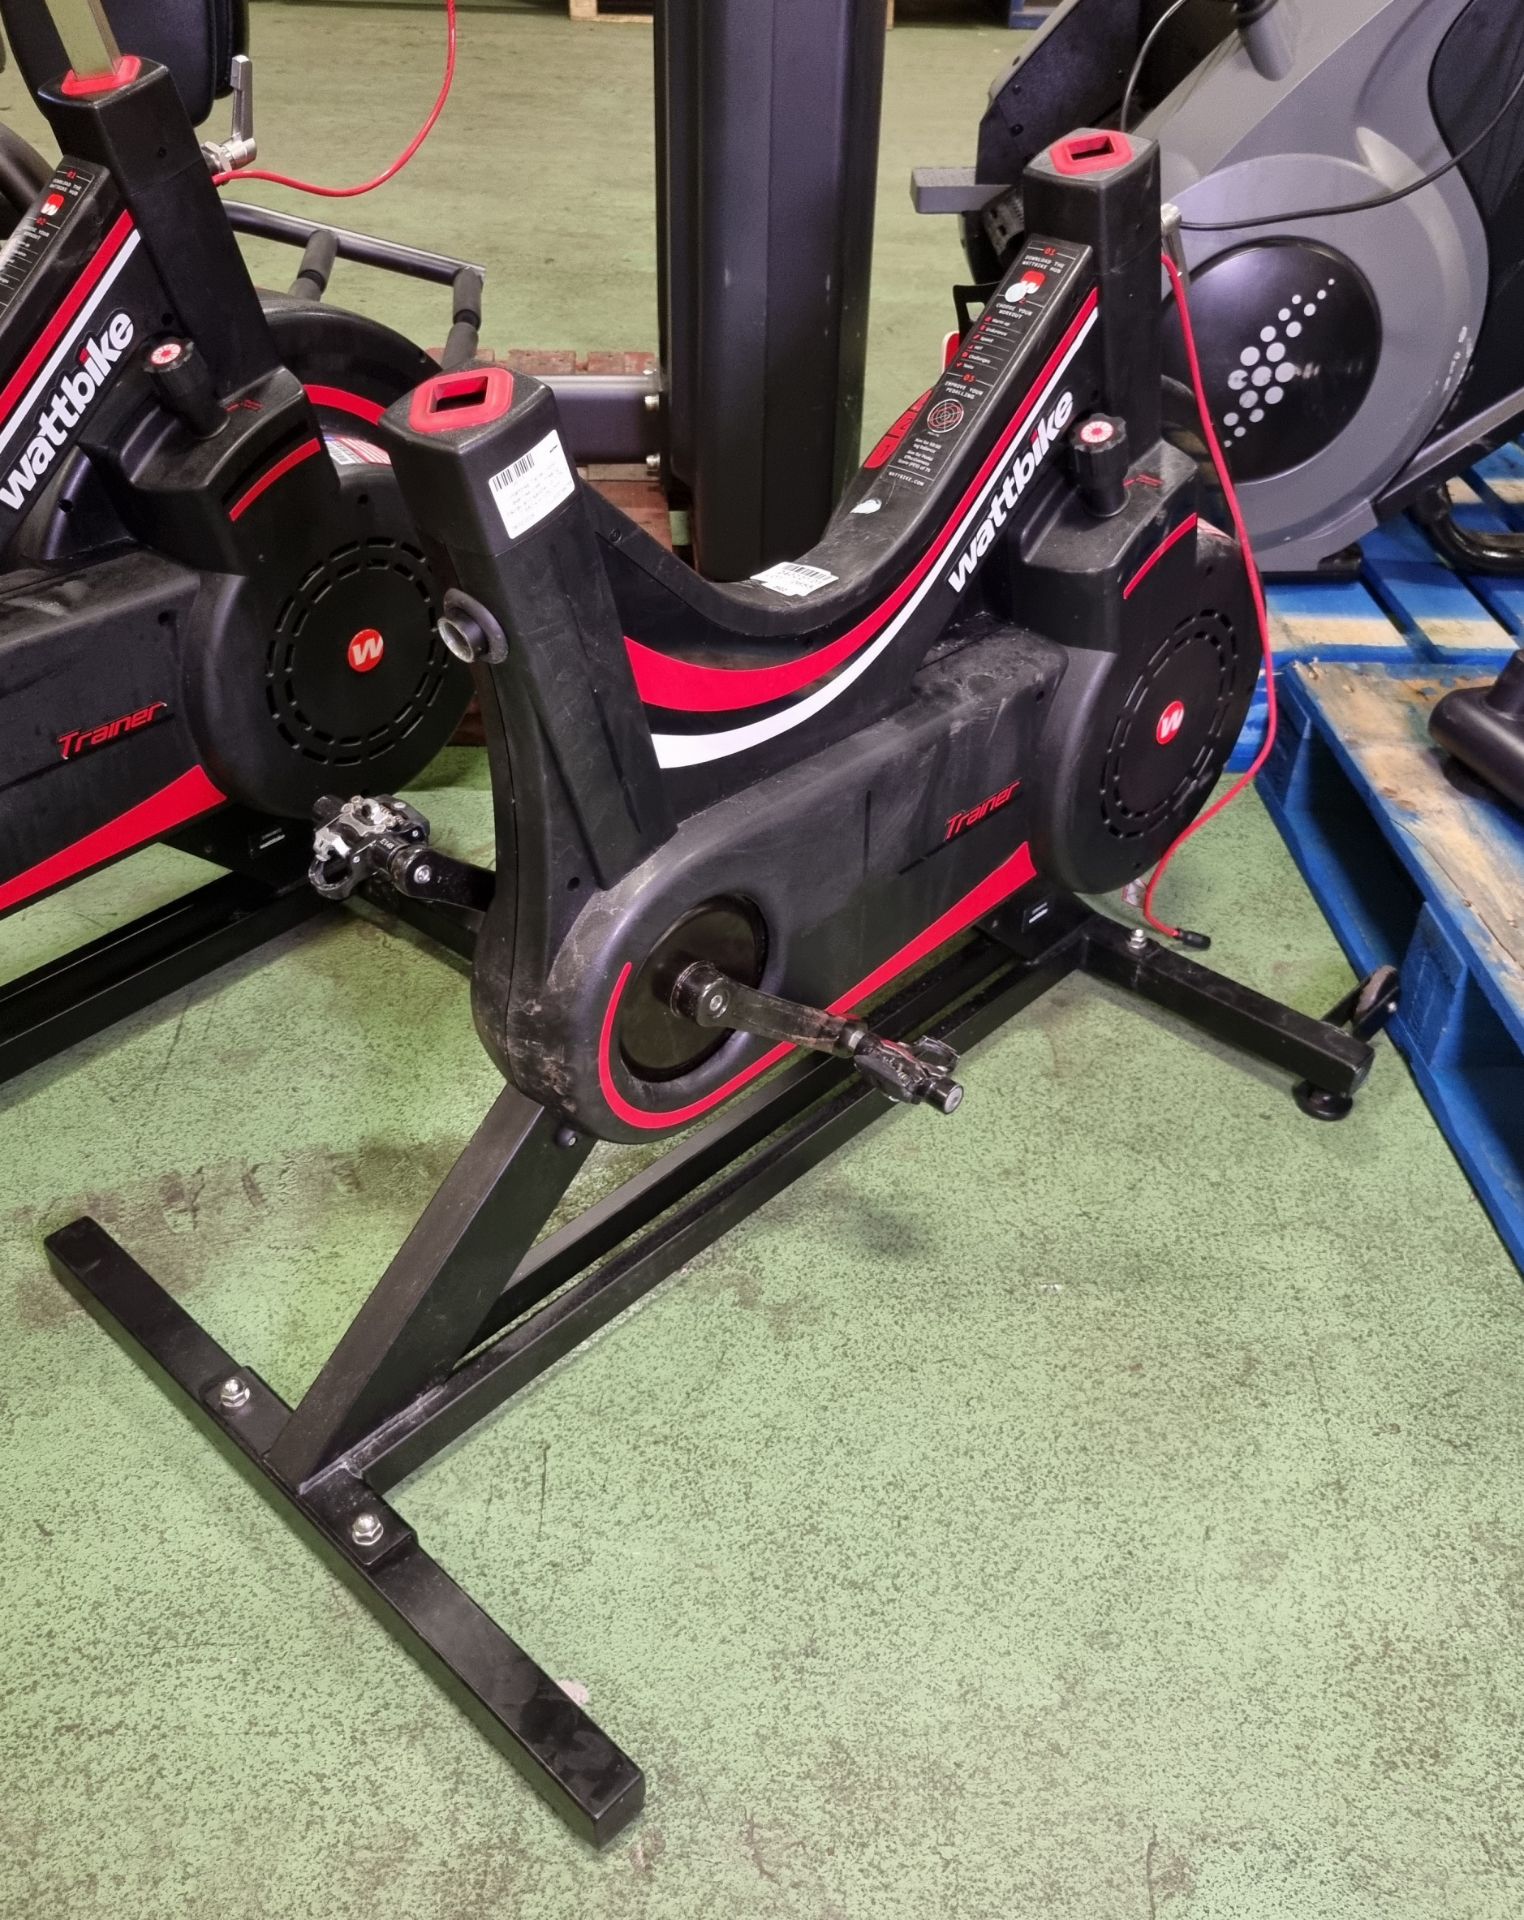 Wattbike Trainer indoor exercise bike - BODY ONLY - missing handle bars, display and saddle